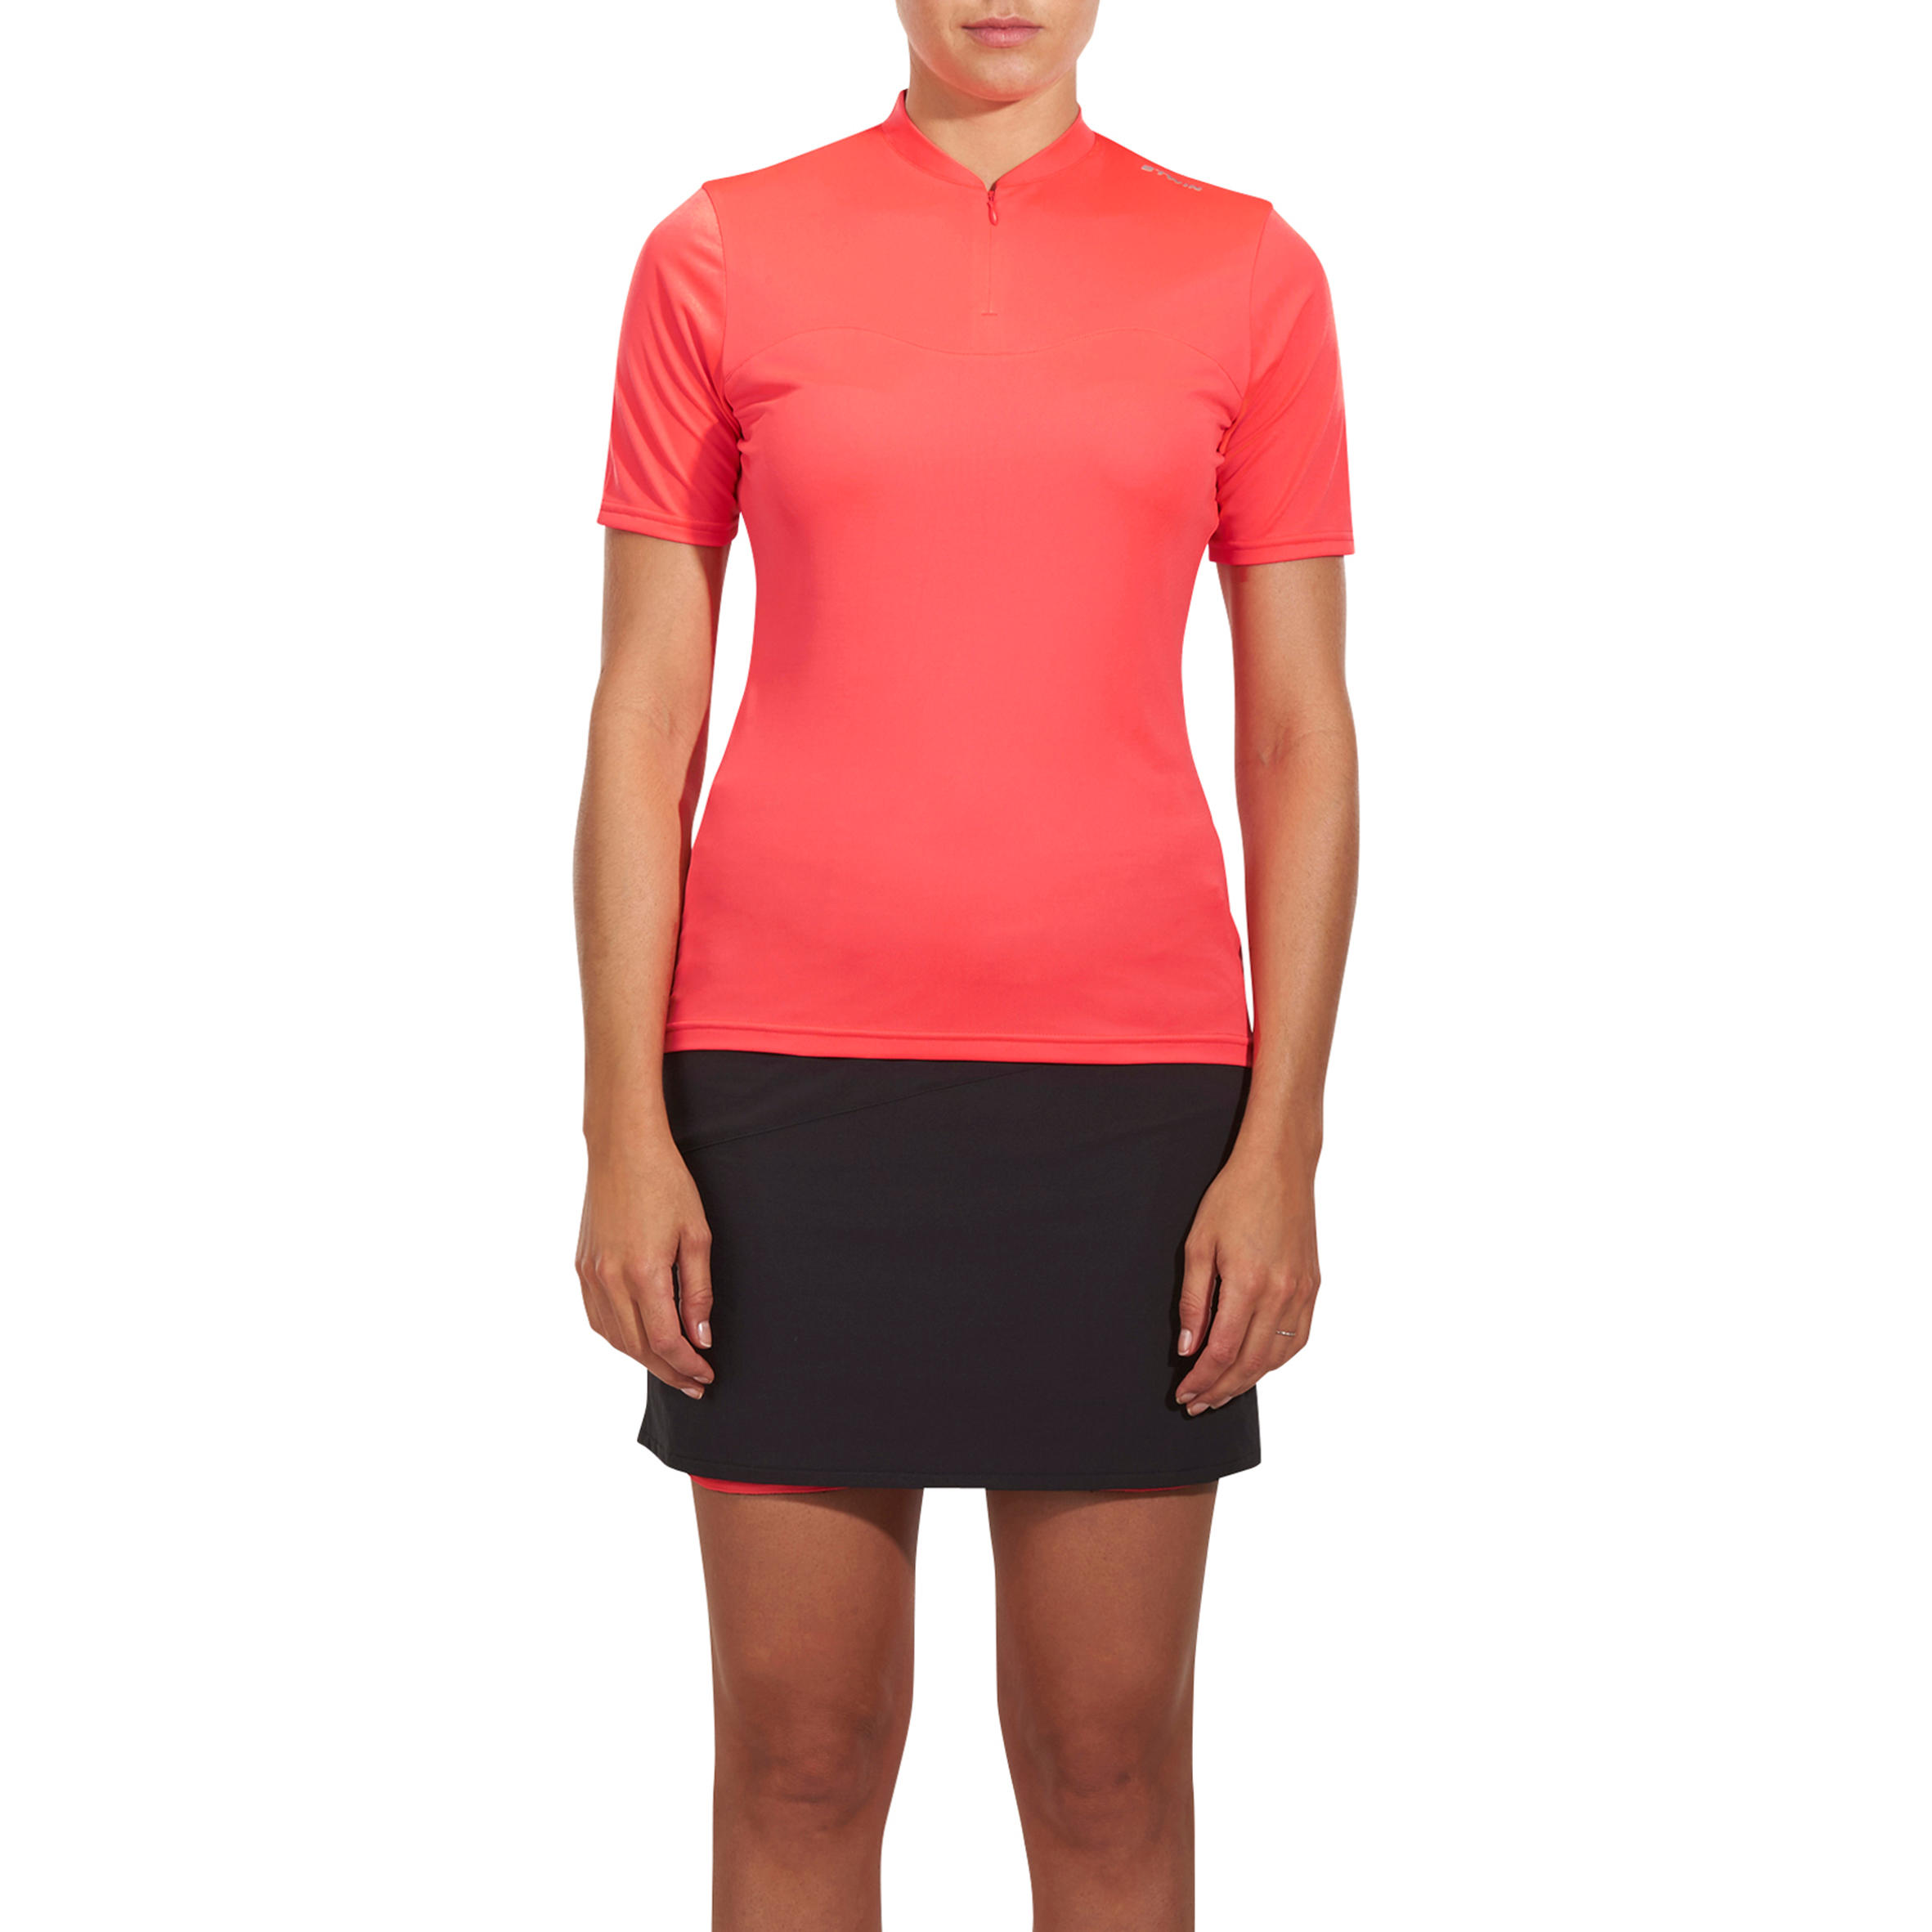 100 Women's Short-Sleeved Cycling Jersey - Pink 7/20